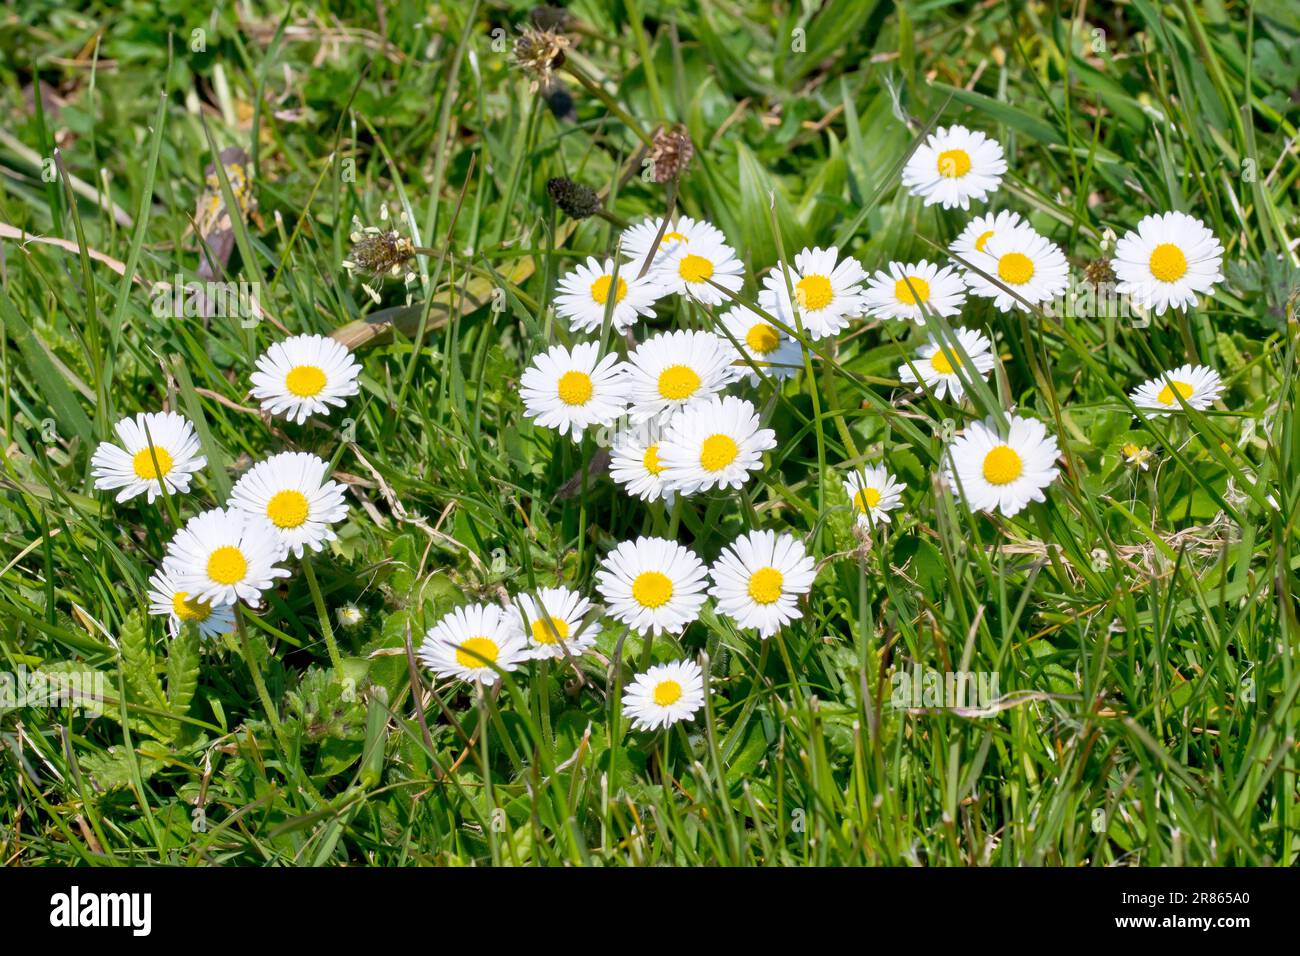 Daisy or Daisies (bellis perennis), close up of a group of the very common wildflower growing amongst the rough grass at the edge of a park. Stock Photo